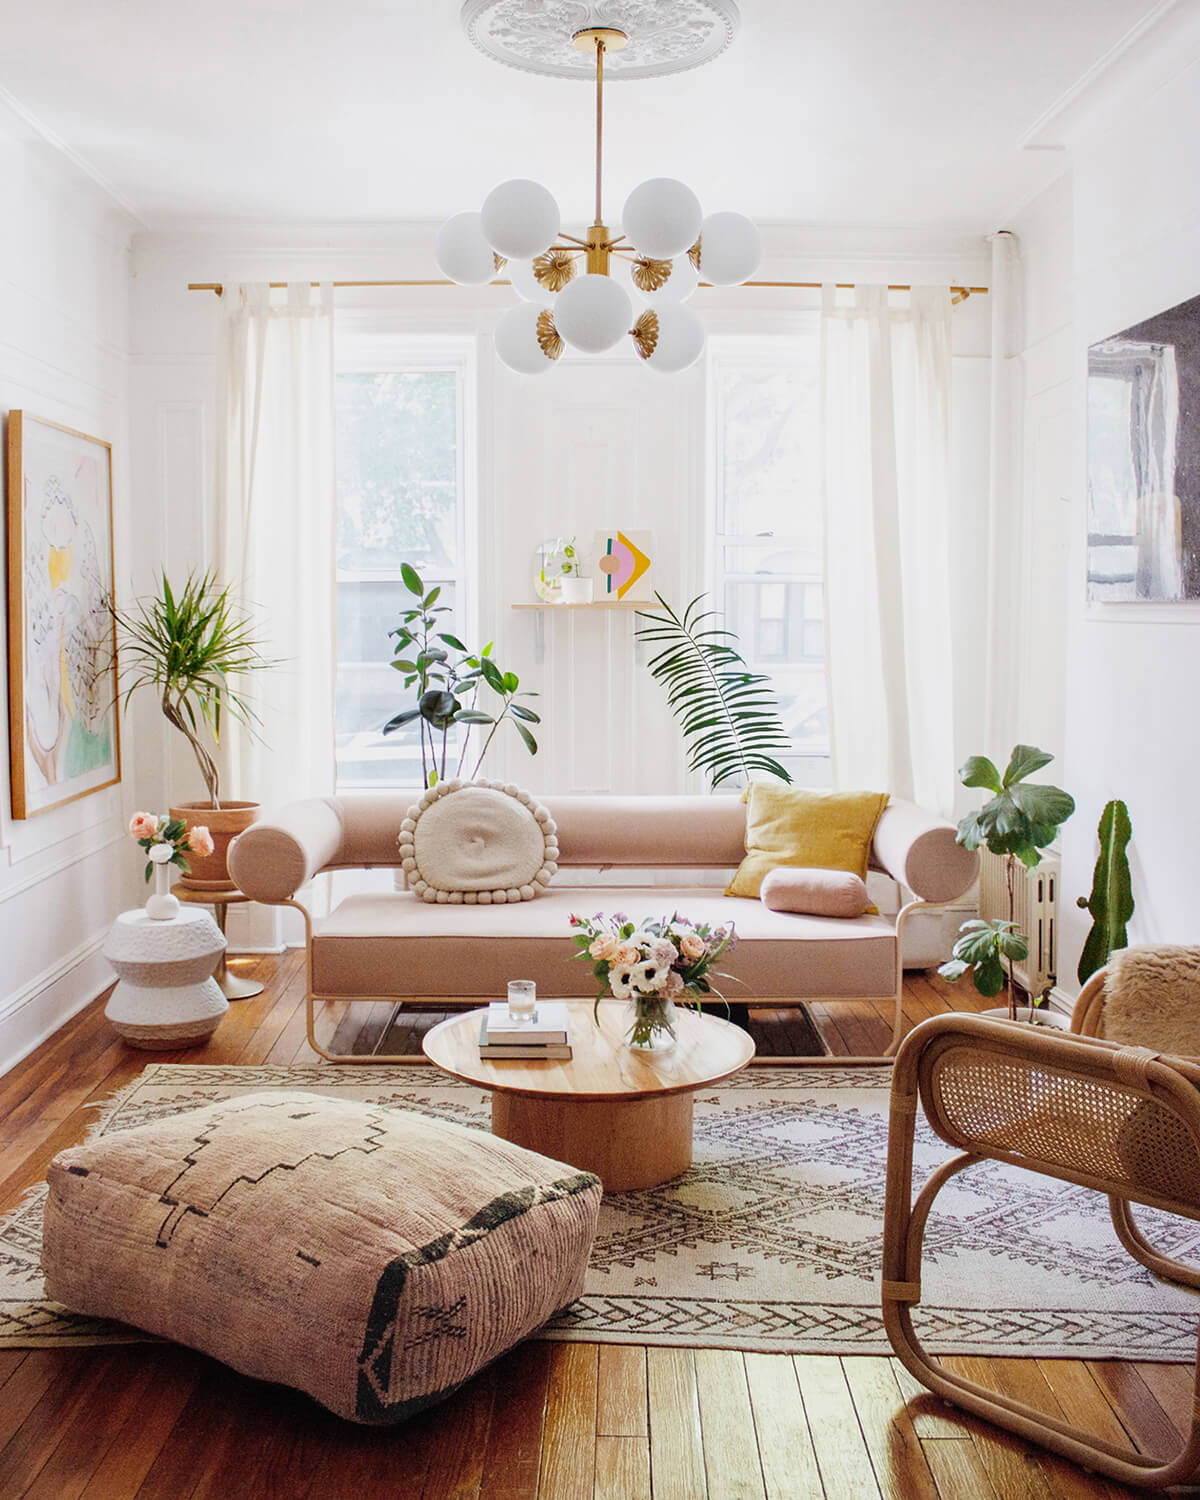 Modern Studio Apartment Decor: A Fresh And Stylish Take On Small Space Living